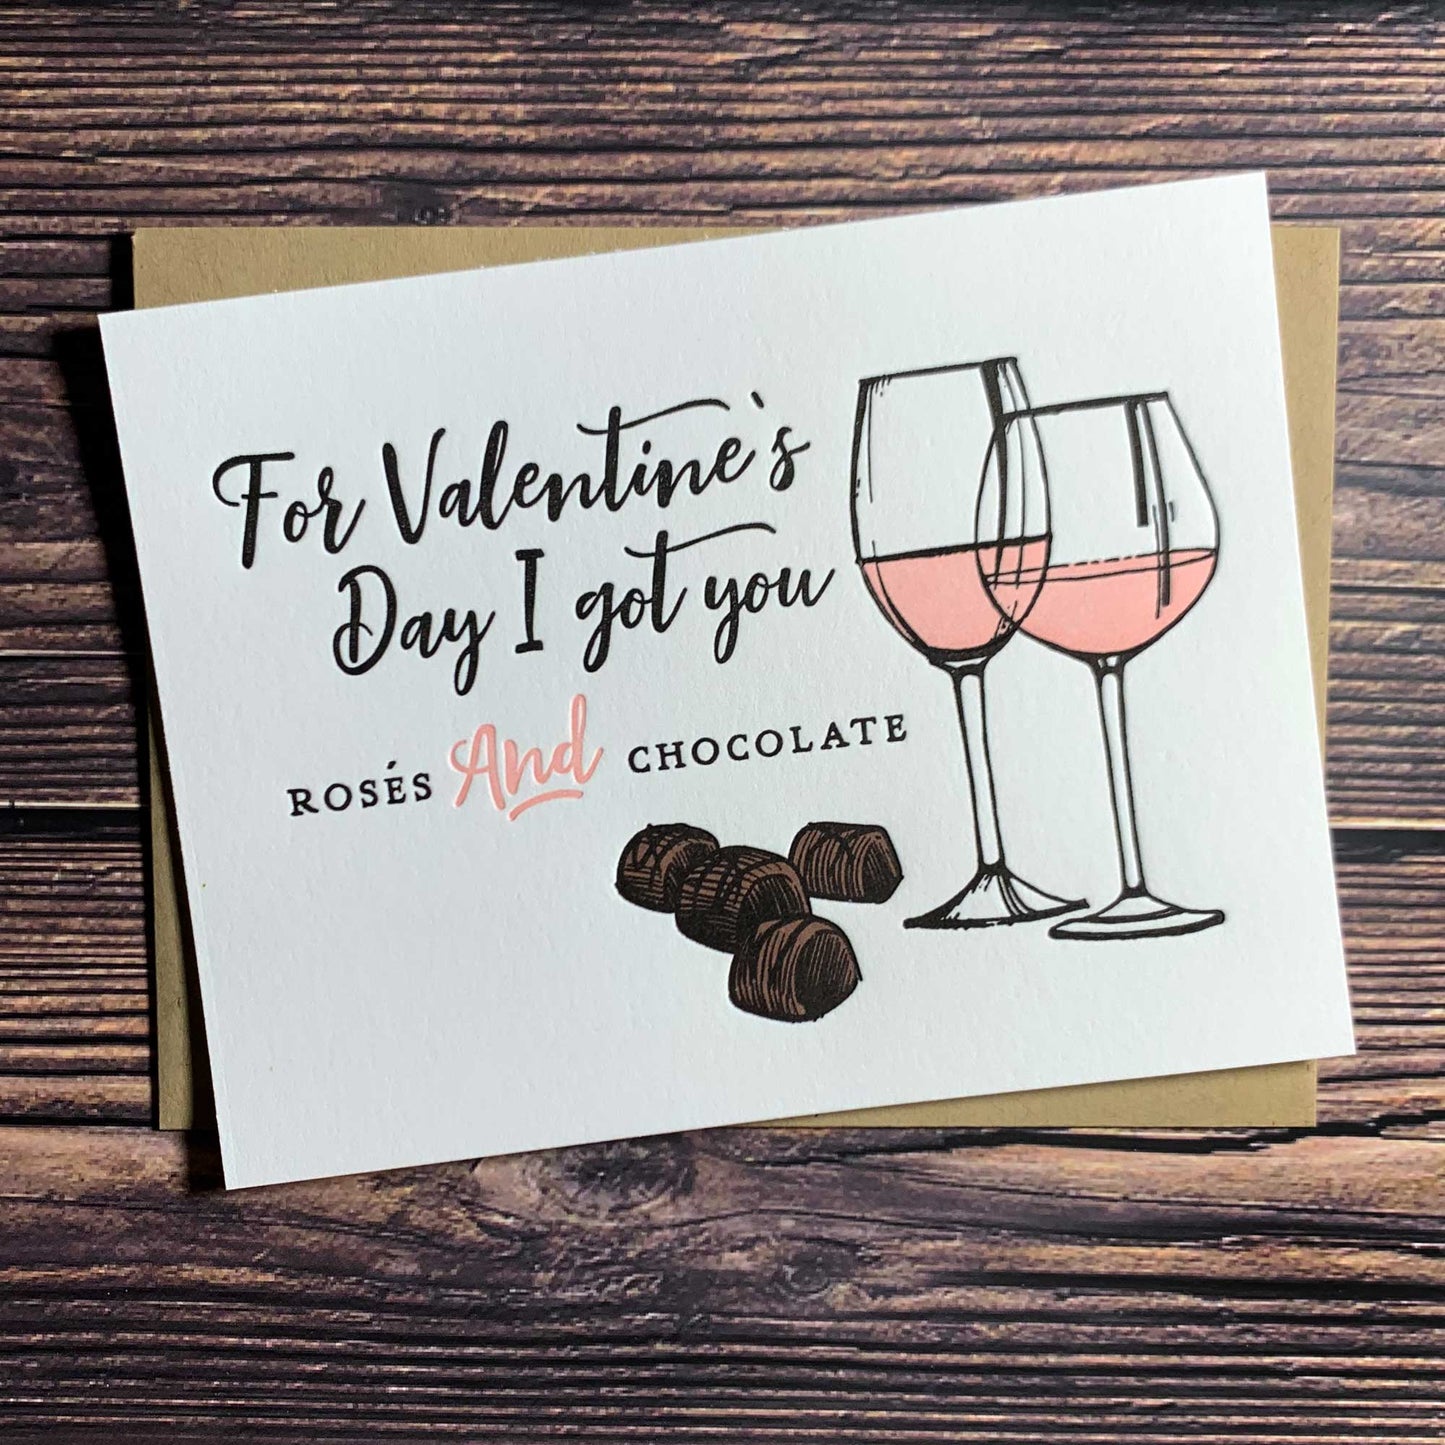 For Valentine's Day I got you rosés and chocolate, Funny Valentine's Day Card, etterpress printed, includes envelope 